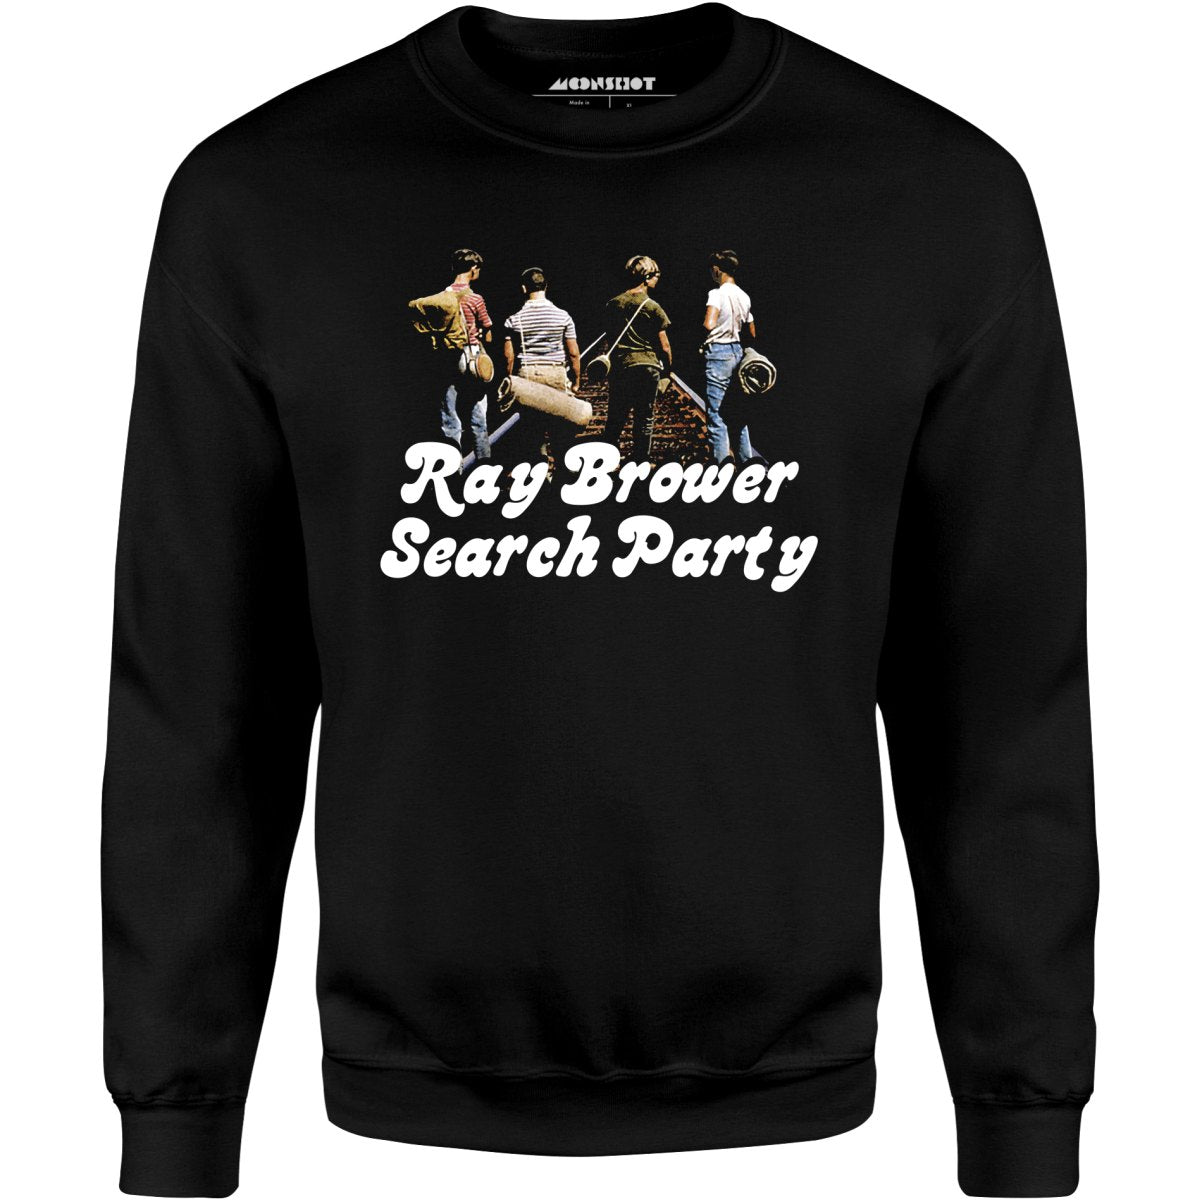 Ray Brower Search Party - Unisex Sweatshirt